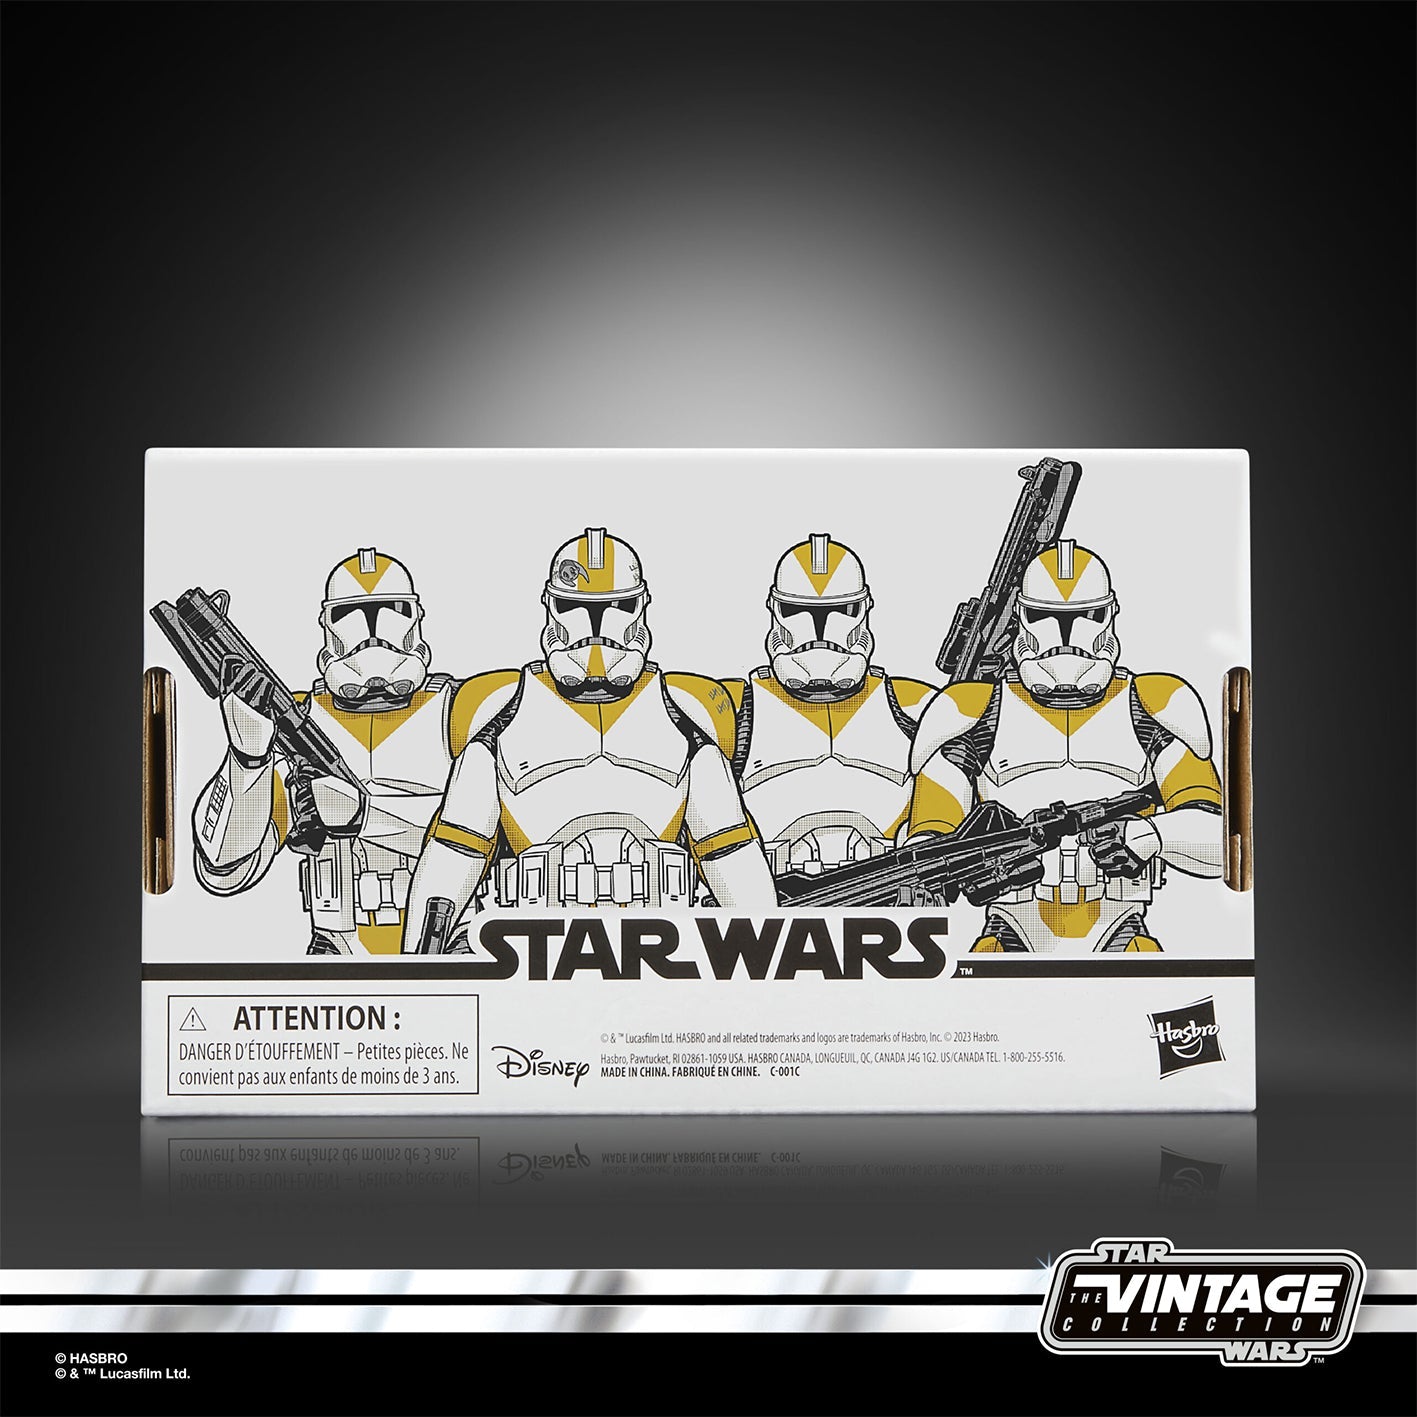 Phase II Clone Troopers (212th) 4-Pack, Star Wars: The Vintage Collection